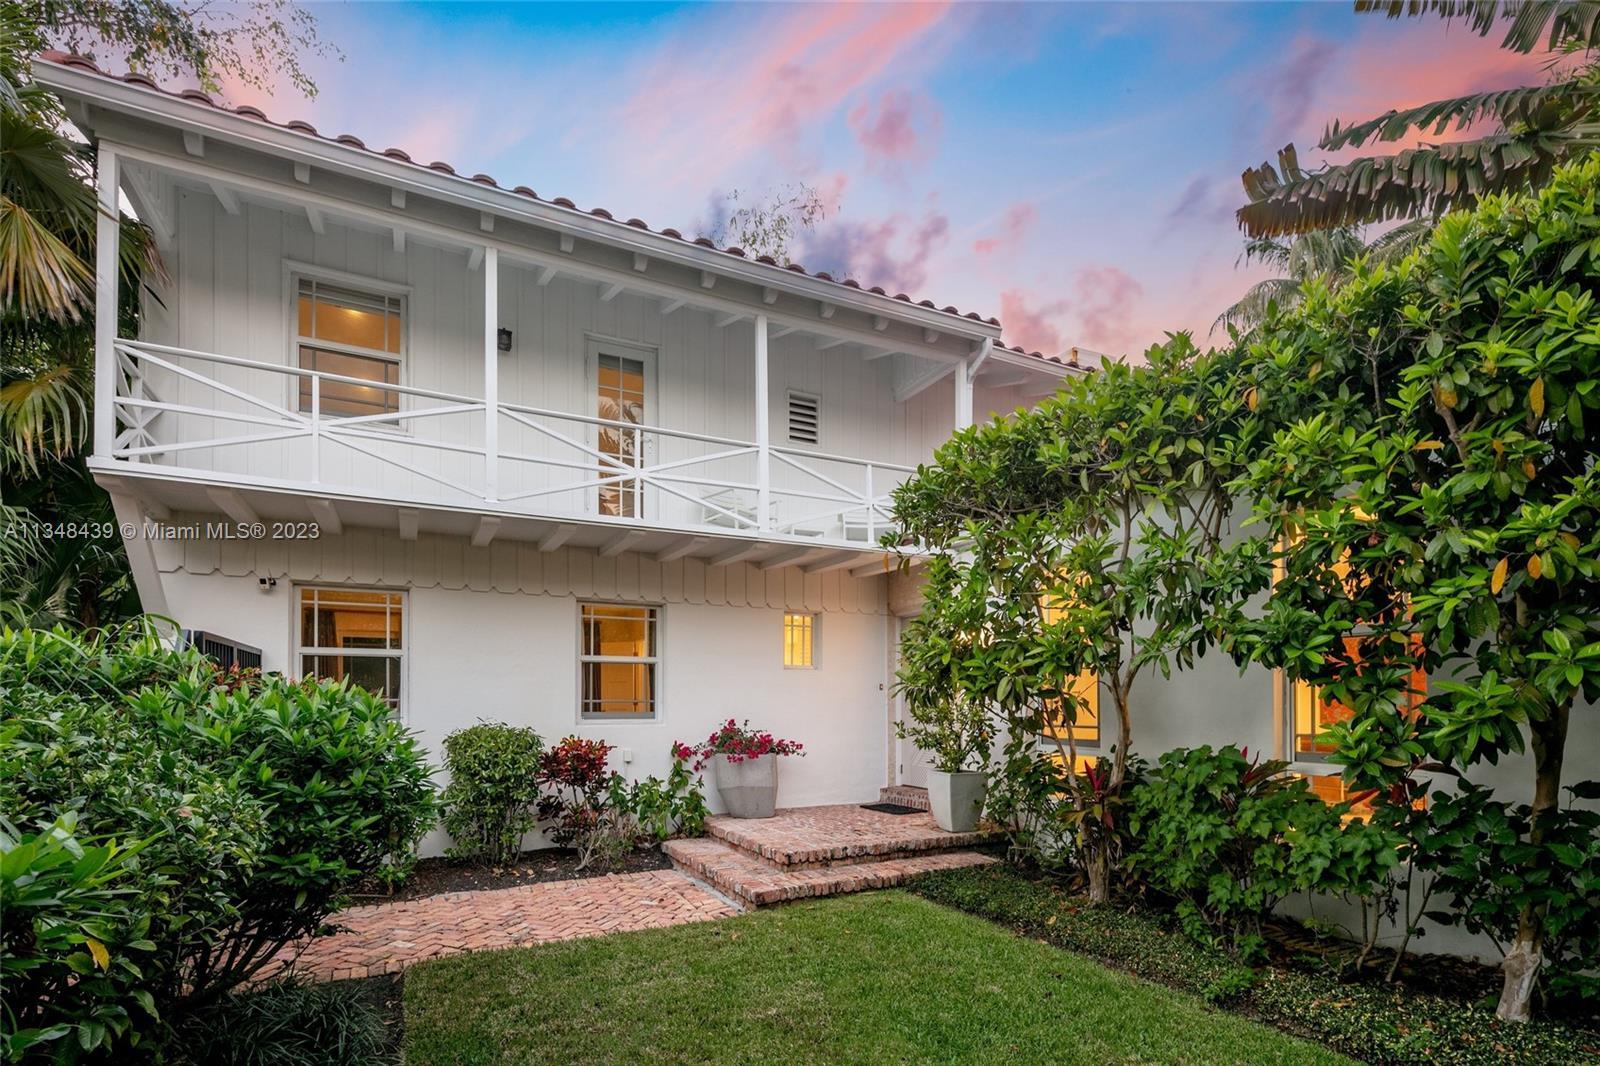 Tucked behind lush landscaping, this fully renovated Miami Beach Bungalow exudes charm & features va